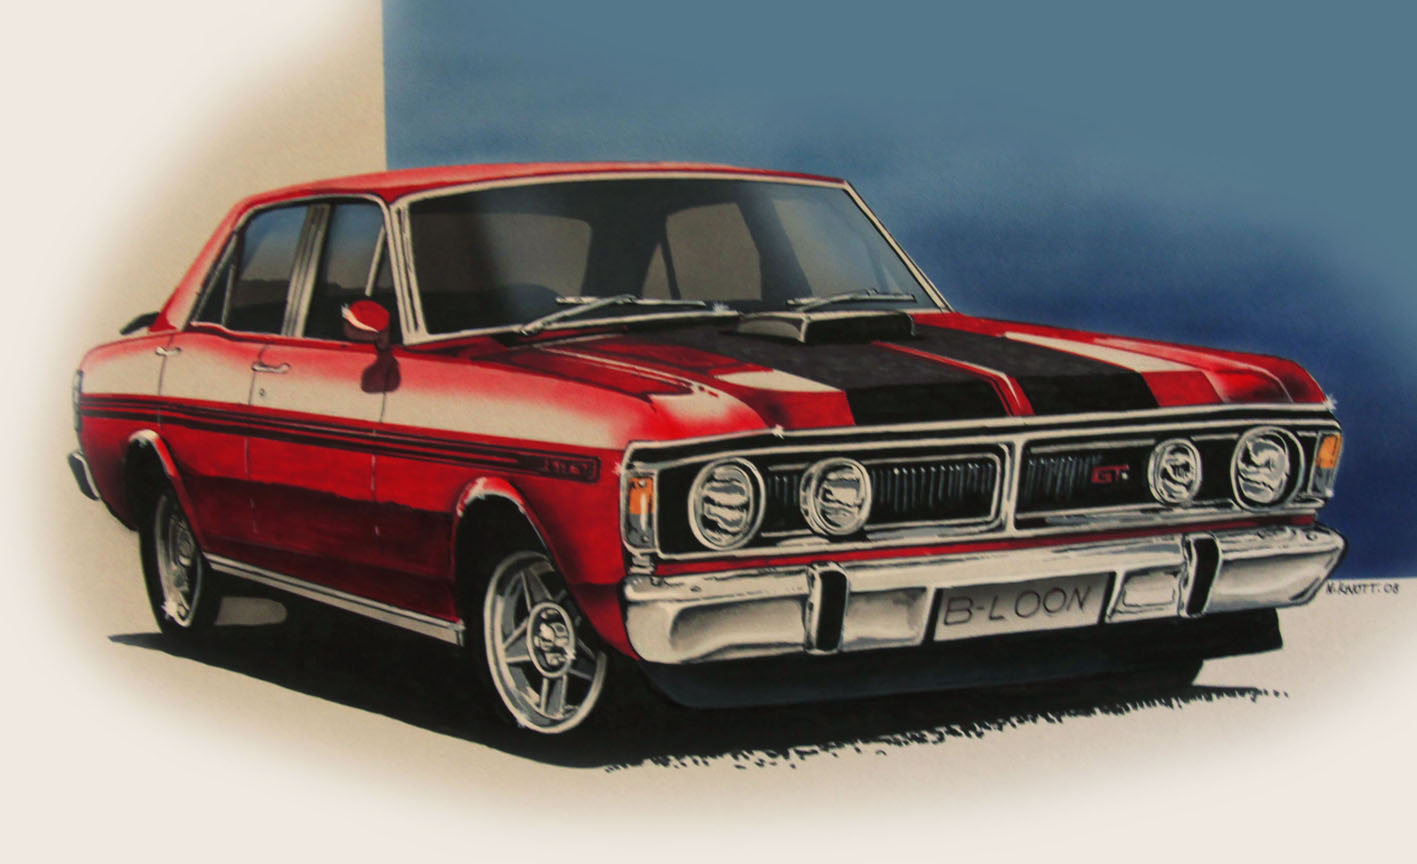 Ford Falcon Wallpaper Image Group